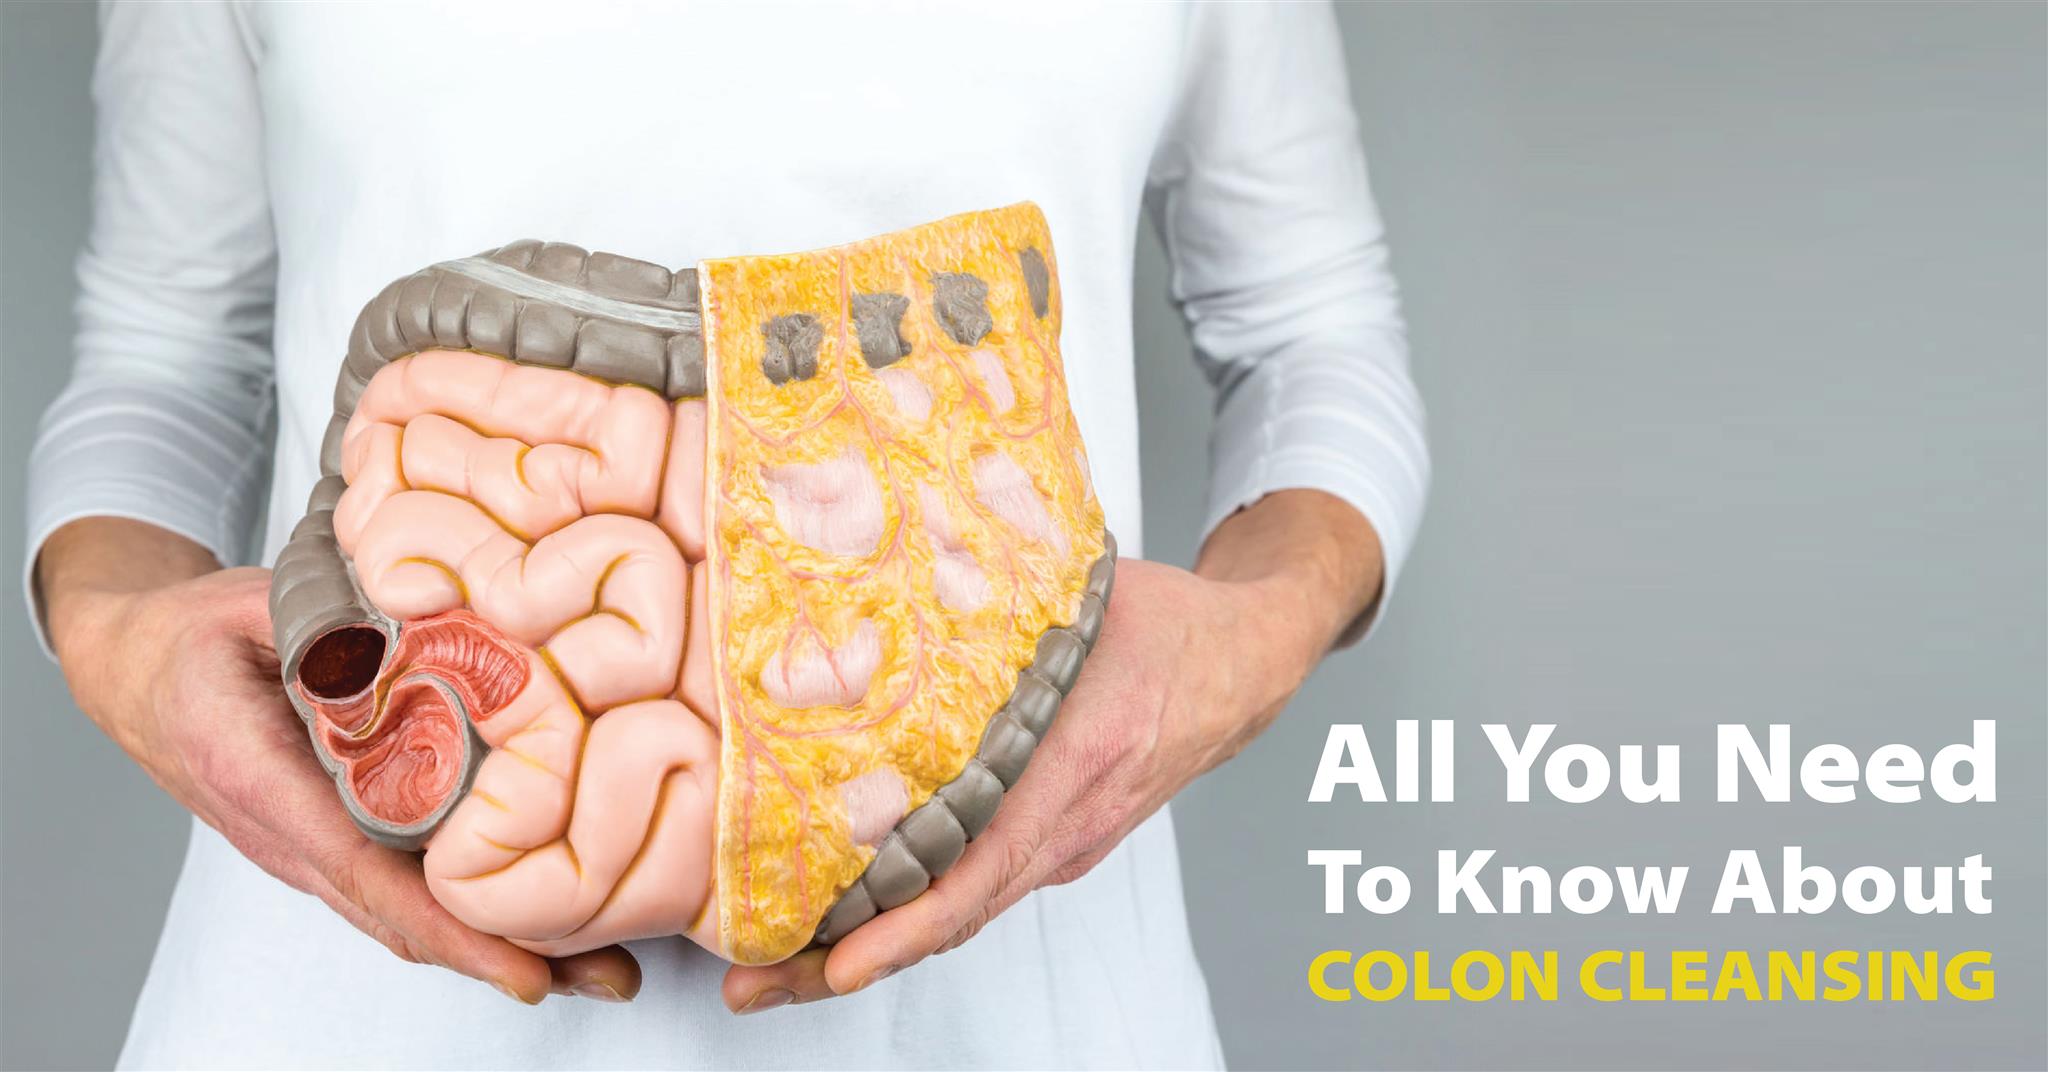 All You Need to Know about Colon Cleansing